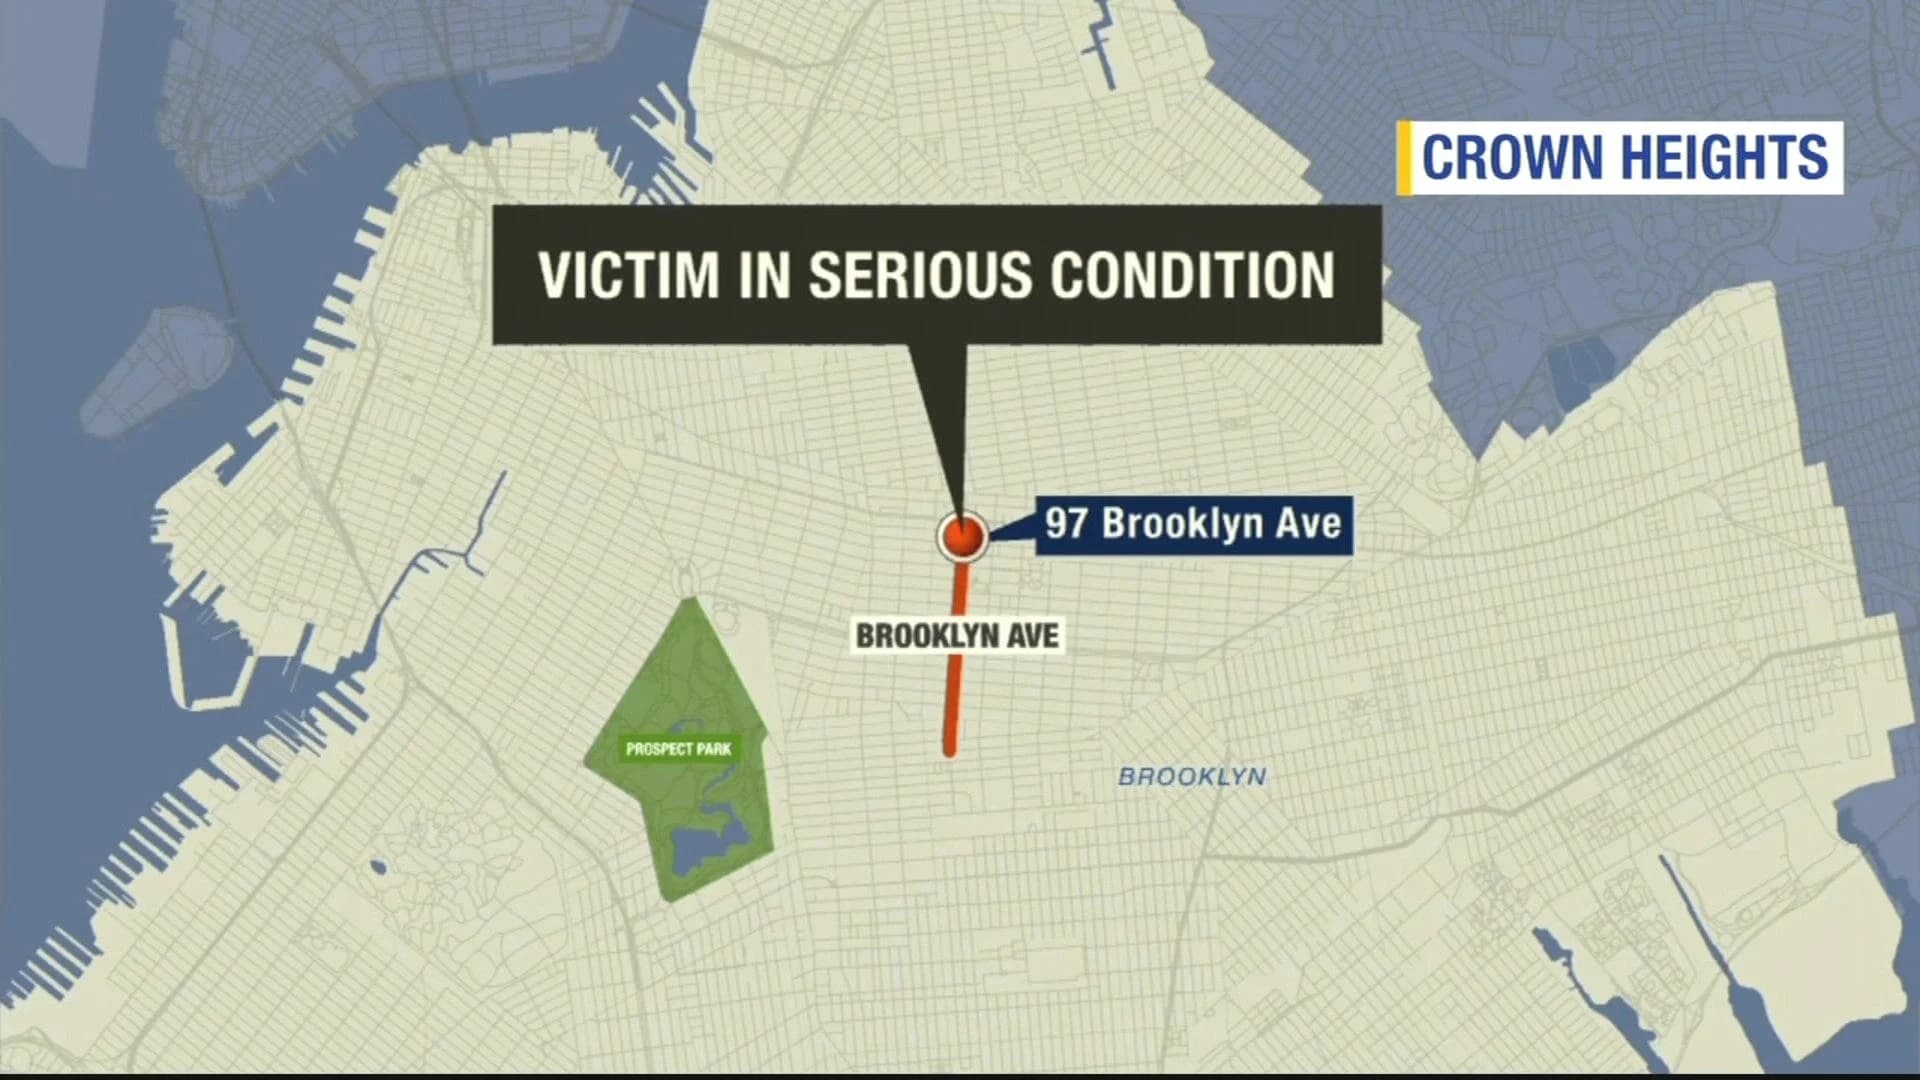 EMS responds to victim of violent act on Brooklyn Ave.